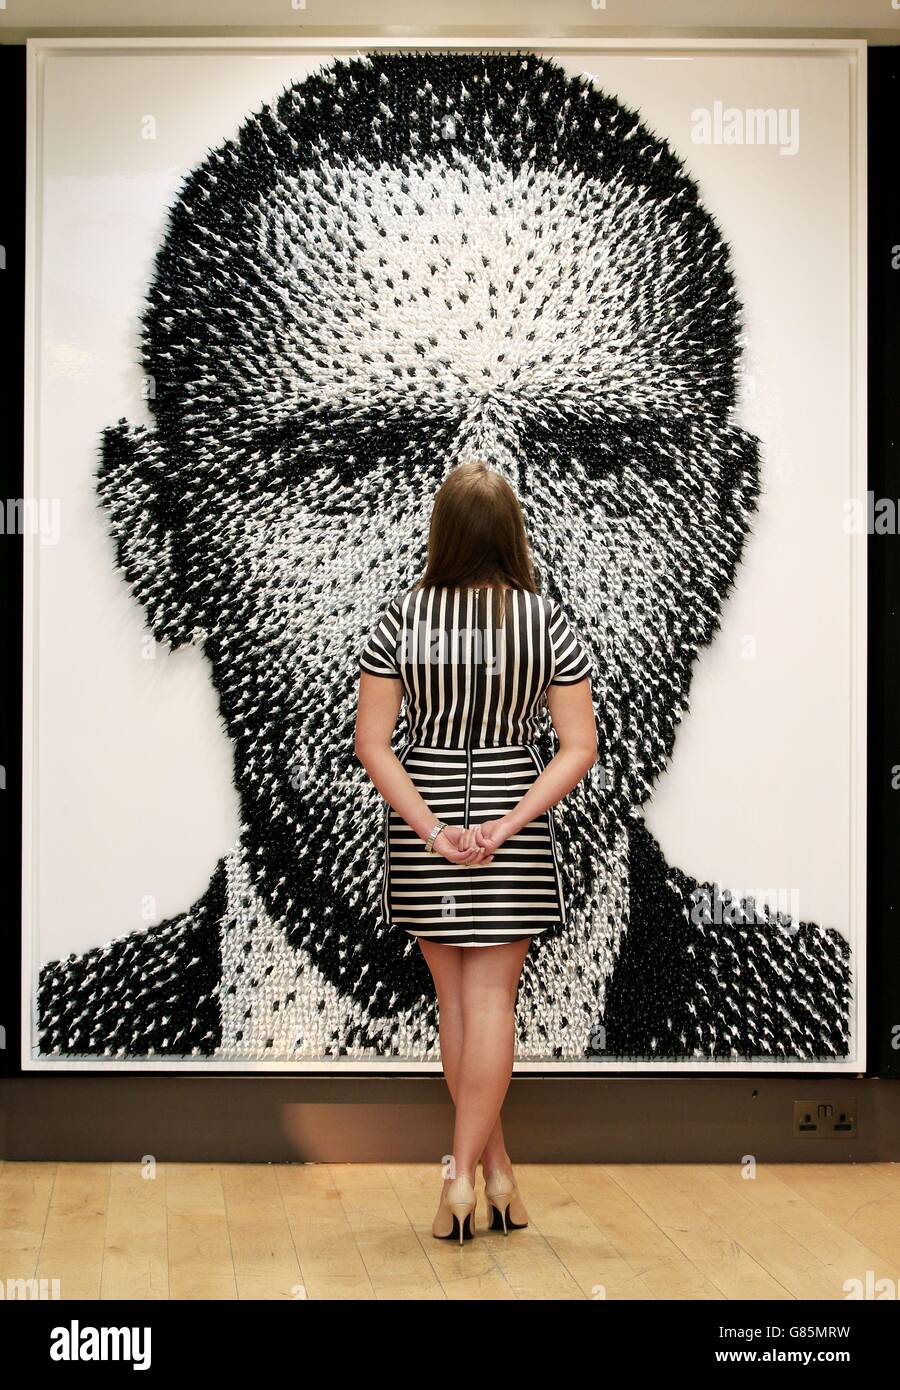 A Christie's employee looks at 'Shoot to Kill' by Joe Black during a press preview for the third annual 'Out of the Ordinary' auction hosted by Christie's in South Kensington, London. Stock Photo